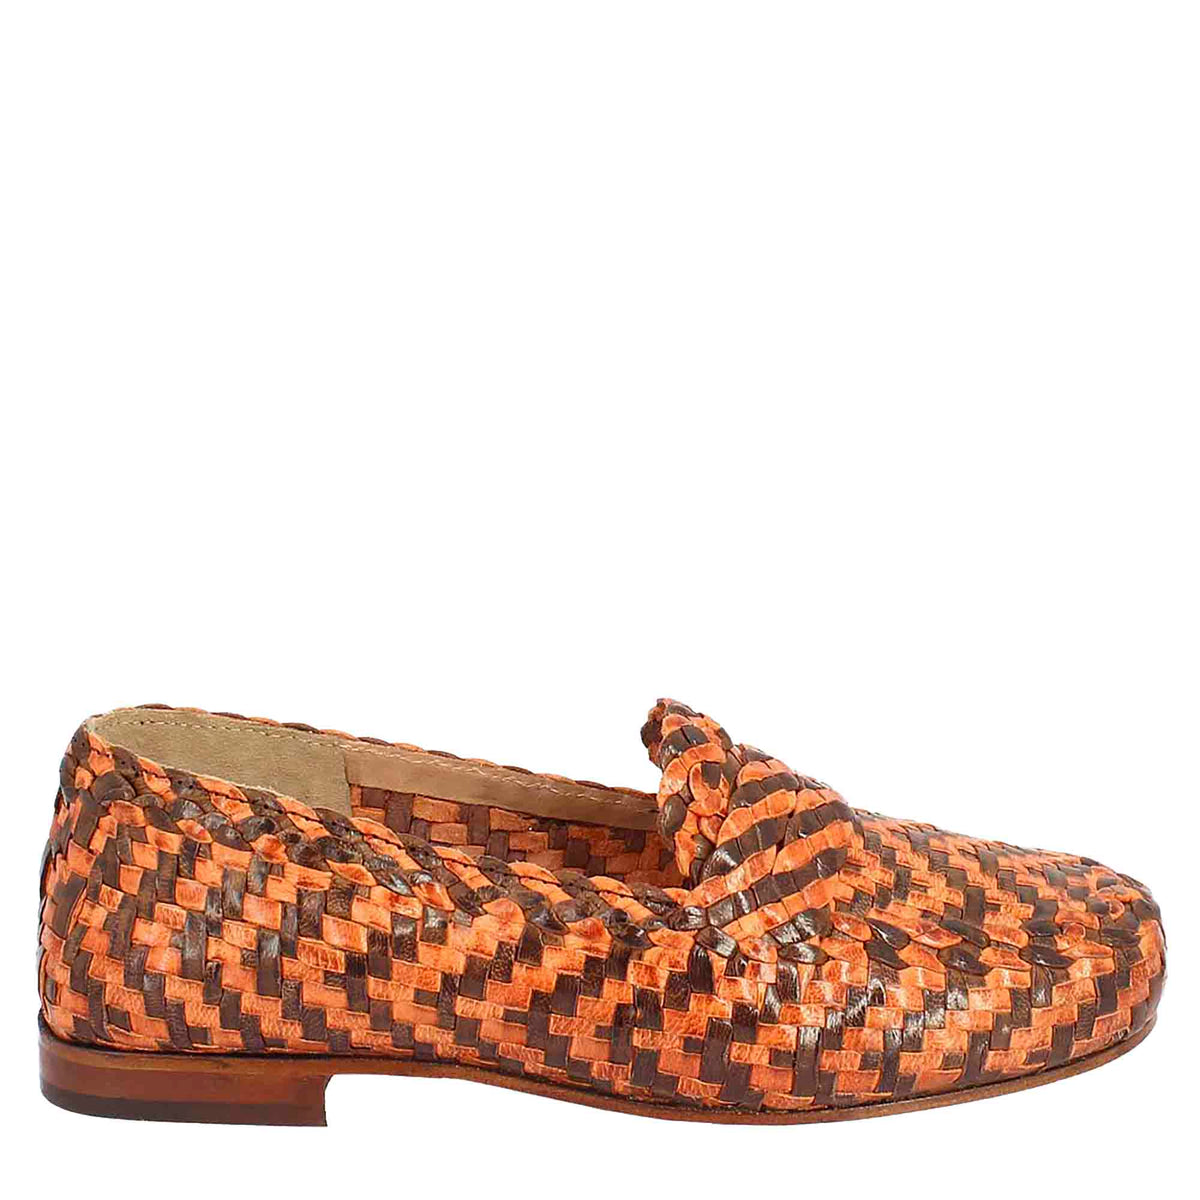 Women's moccasins in brown and orange woven leather